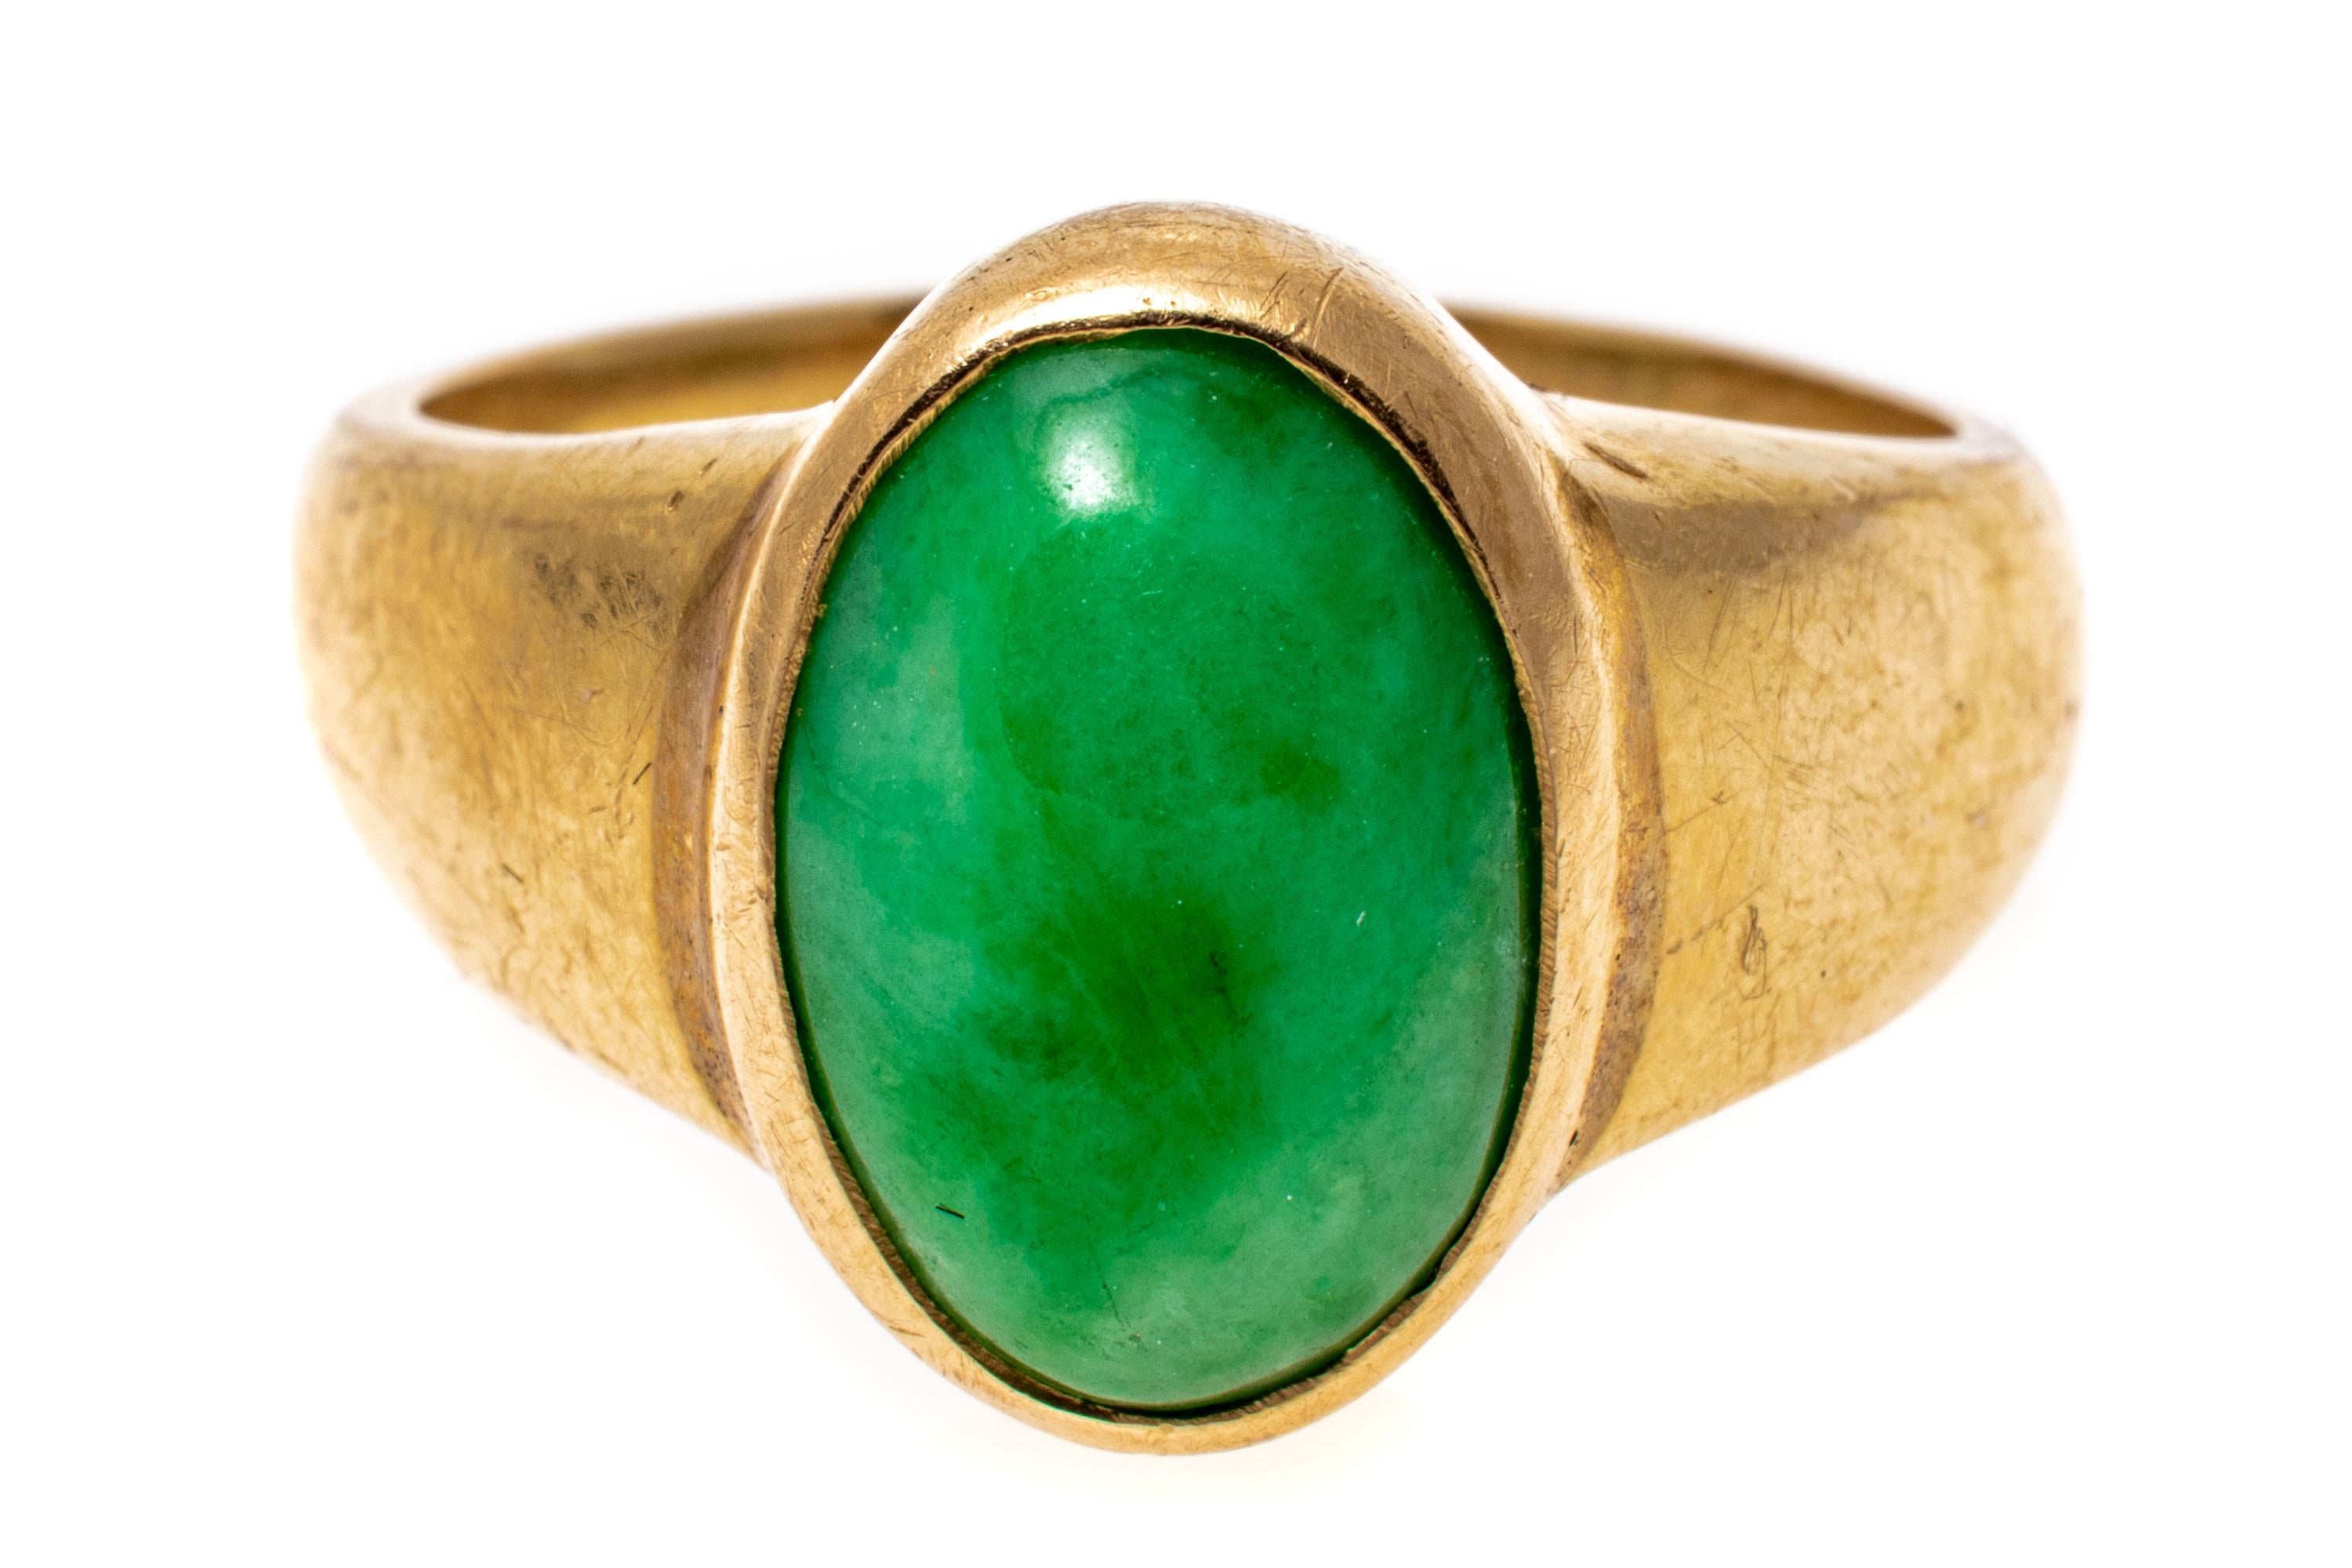 14k yellow gold ring. This simple yellow gold ring has an oval cabachon, green color jadeite jade center, bezel set and finished by wide, high polished shoulders.
Marks: 14k
Dimensions: 3/8